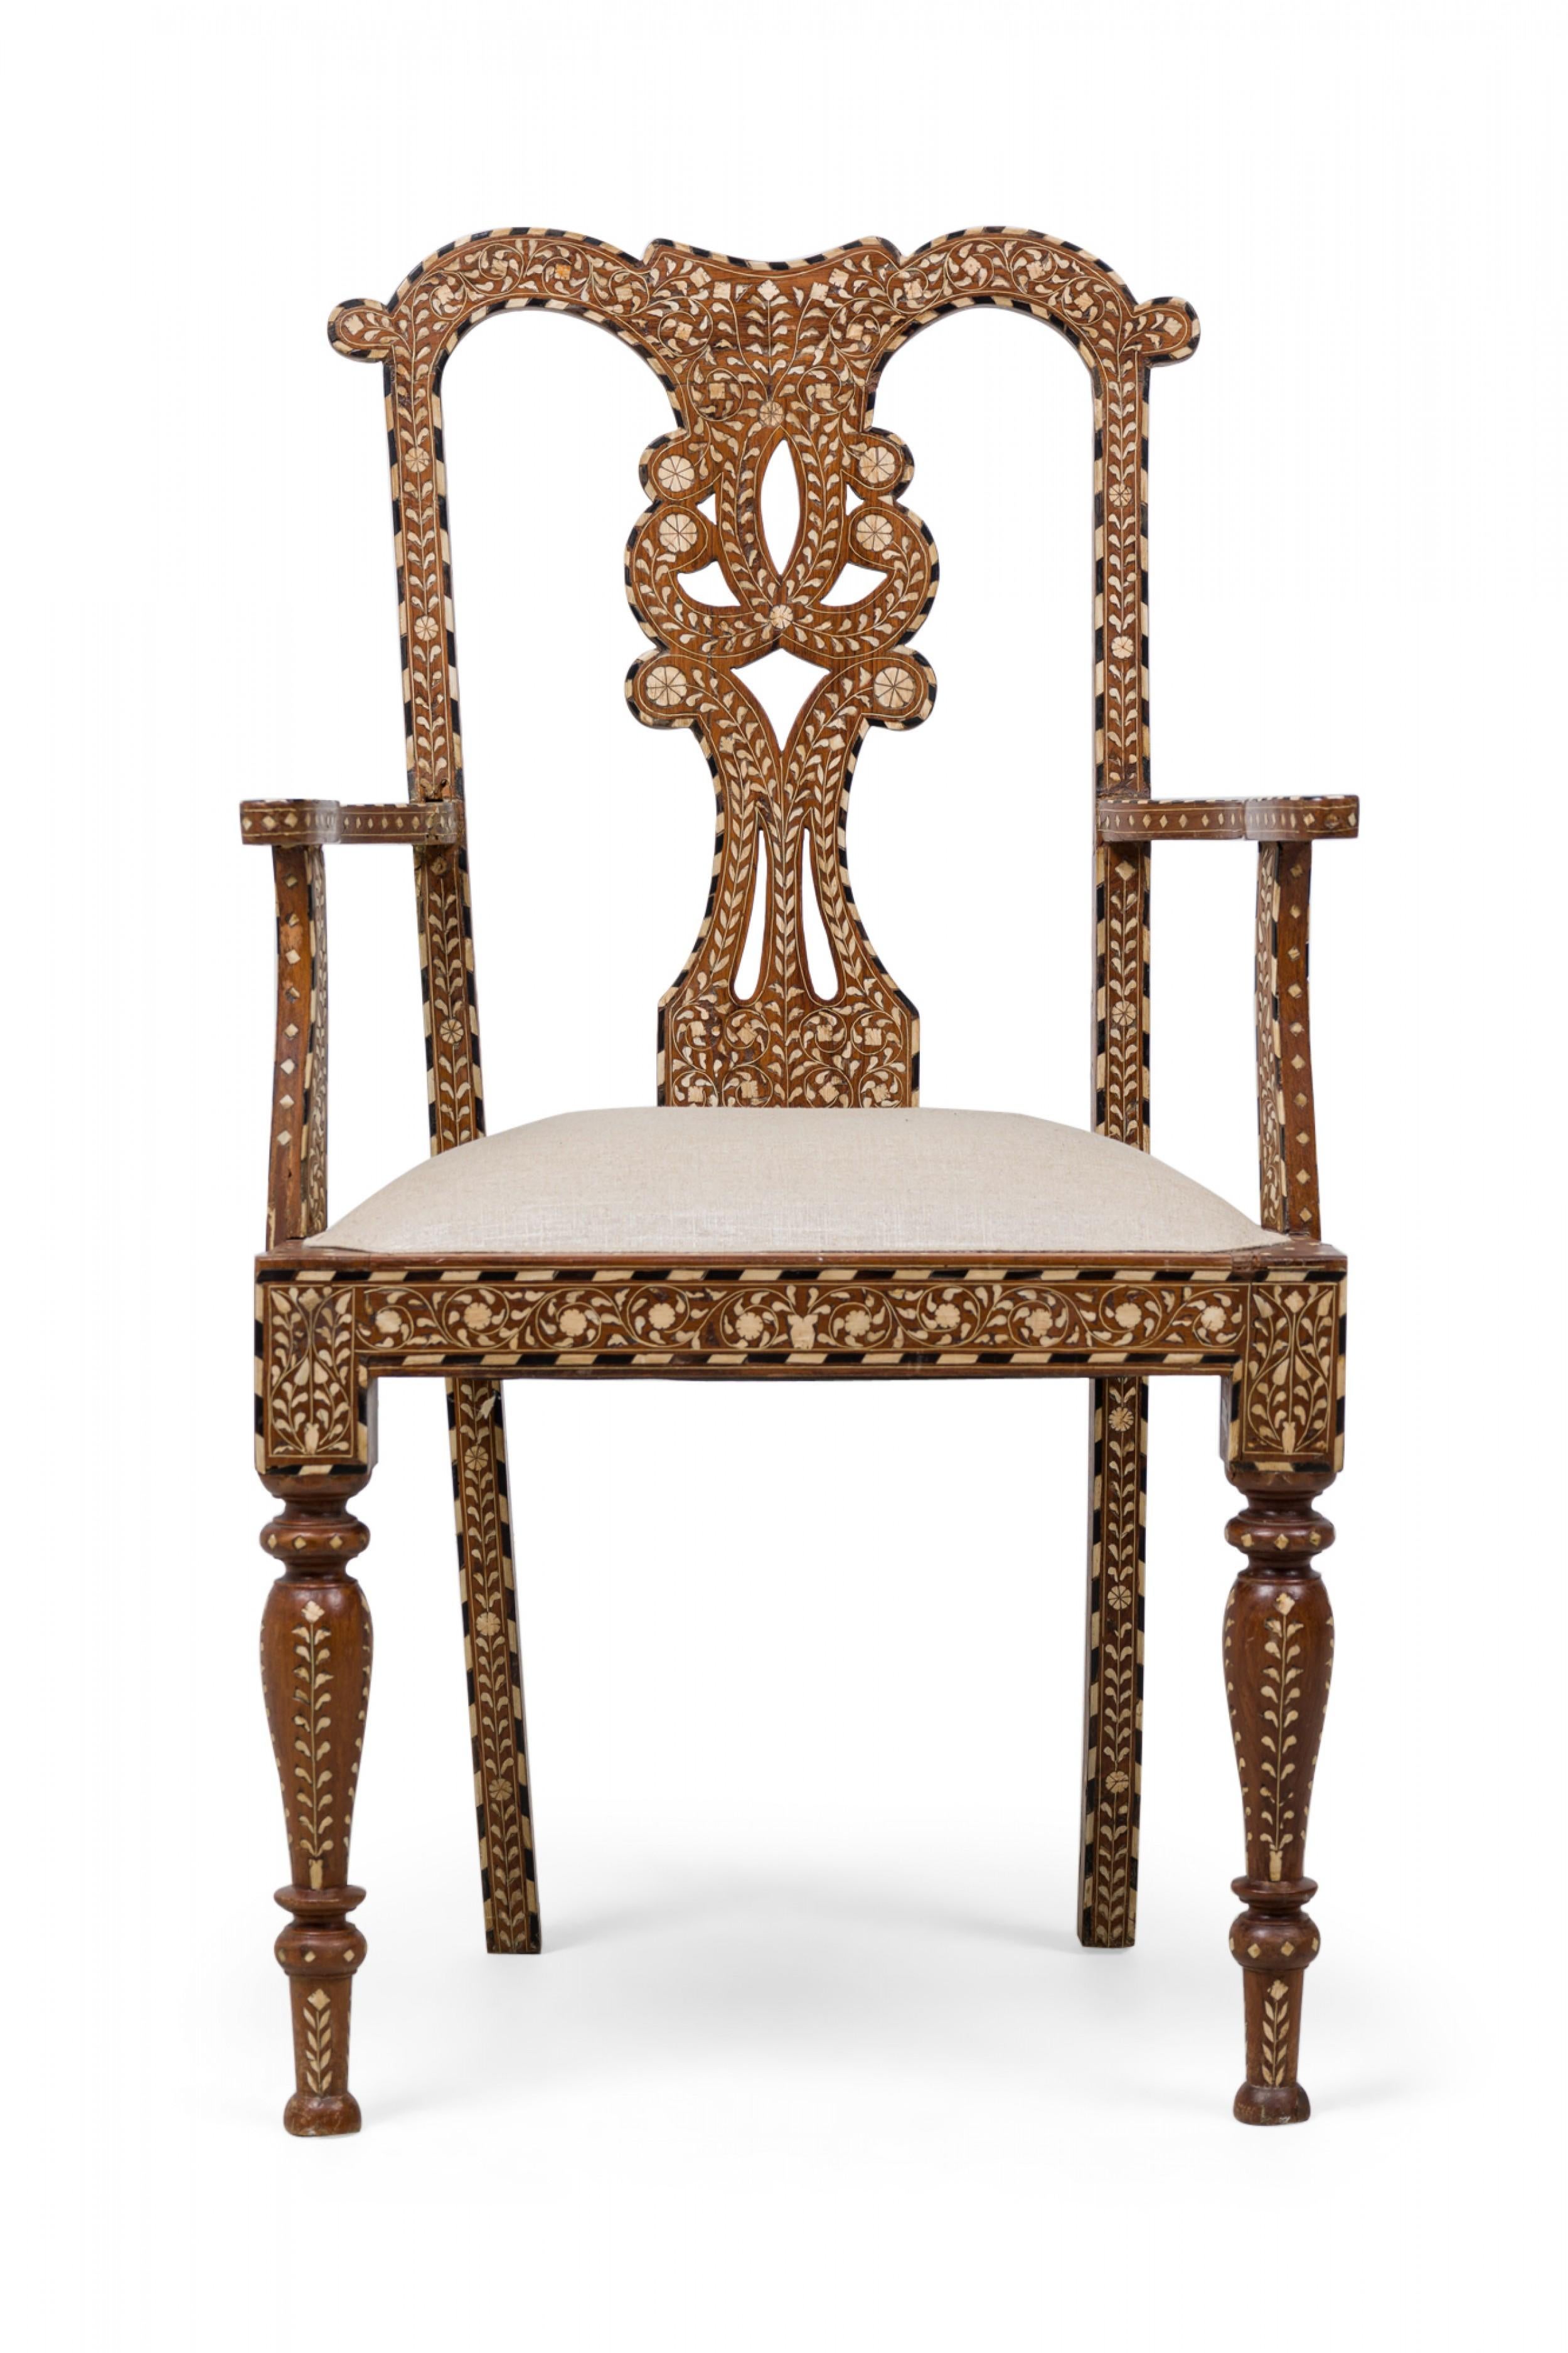 SET of 4 Anglo-Indian (19th century) carved hardwood armchairs with an openwork scroll form back, an inlaid scroll & foliate pattern between striped borders, beige upholstered padded seat, turned front legs and splayed back legs. (PRICED AS SET).